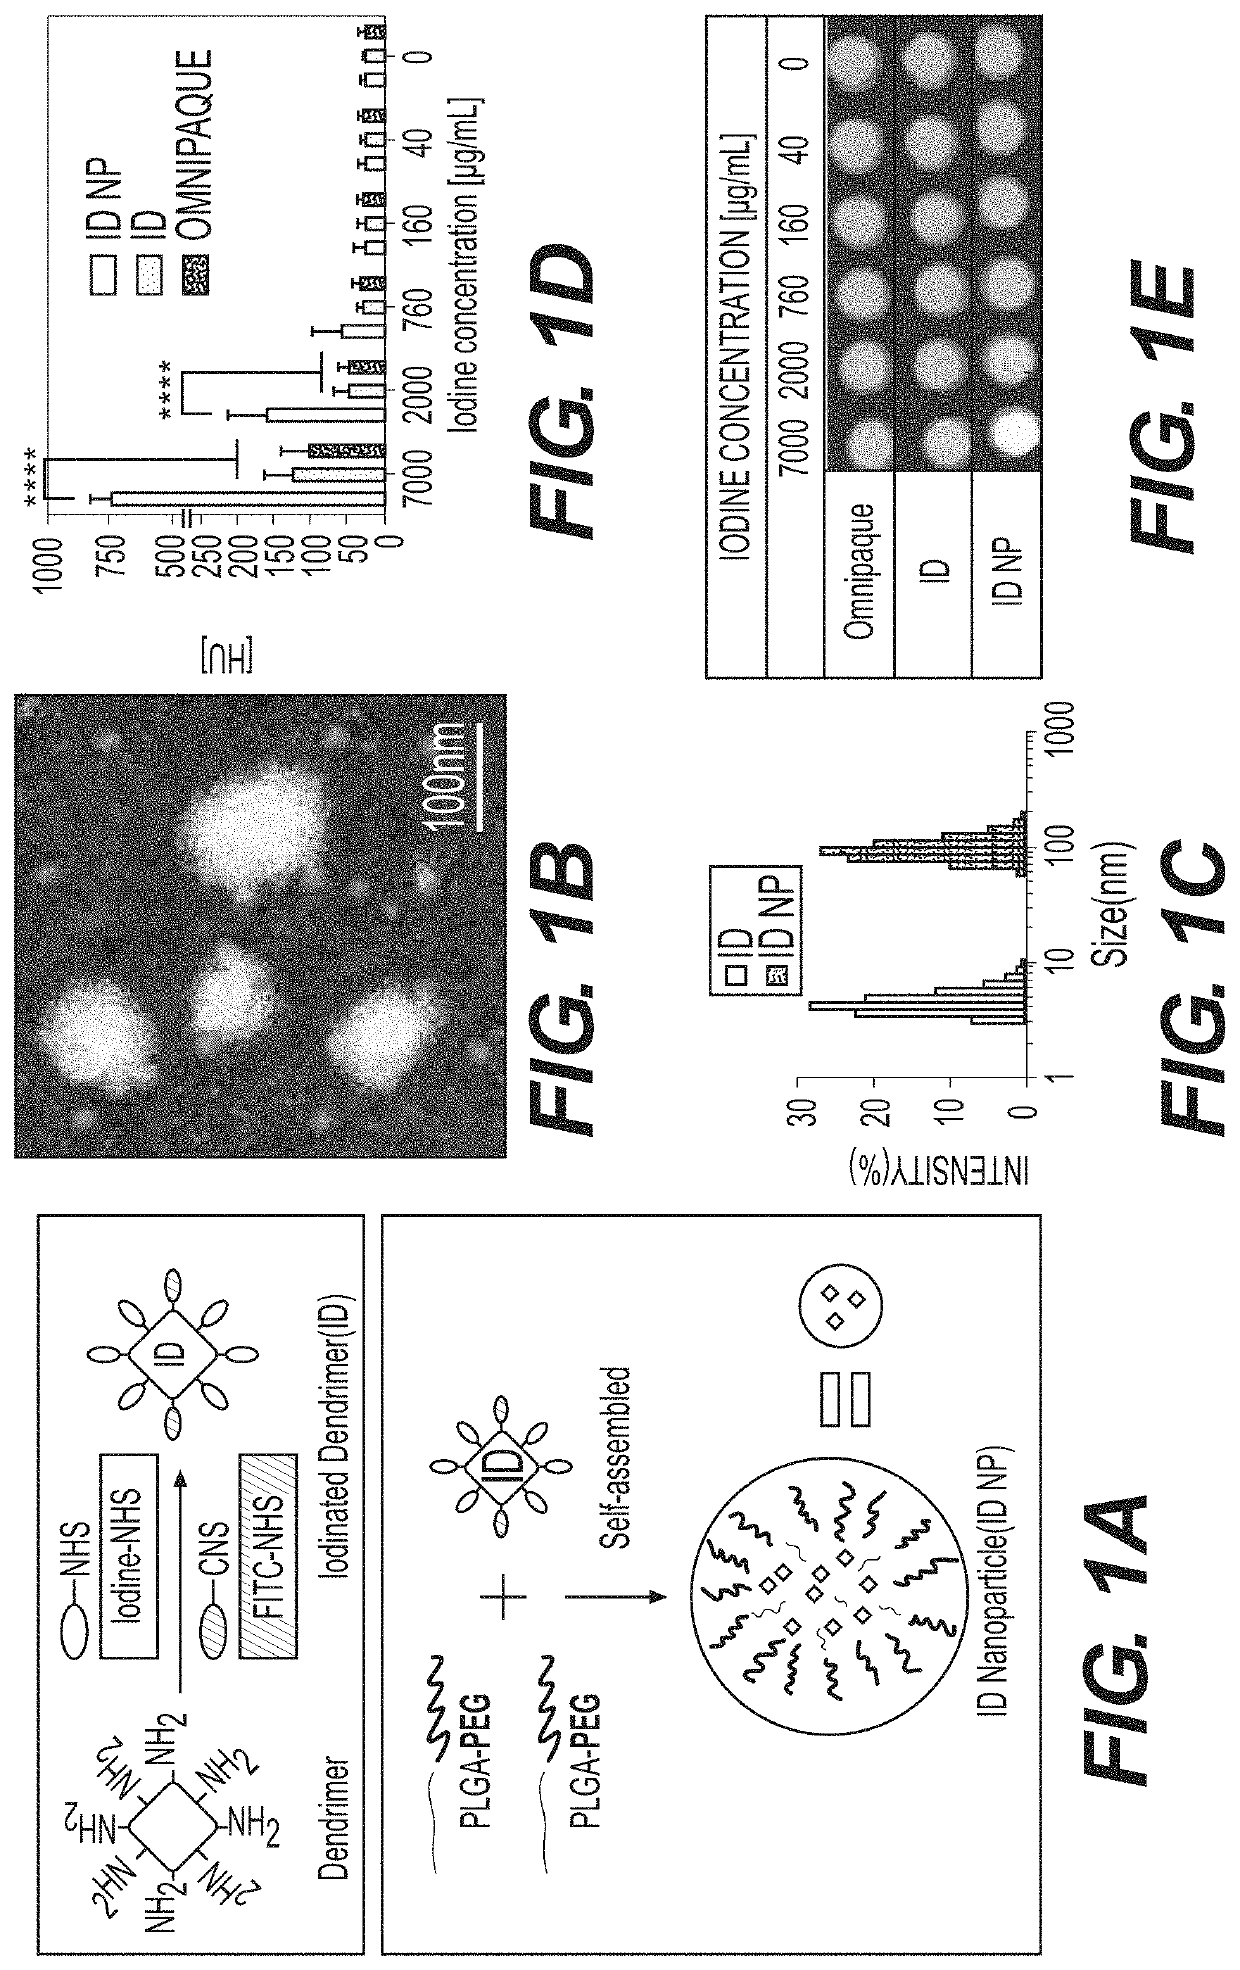 Compositions for nanoconfinement induced contrast enhancement and methods of making and using thereof